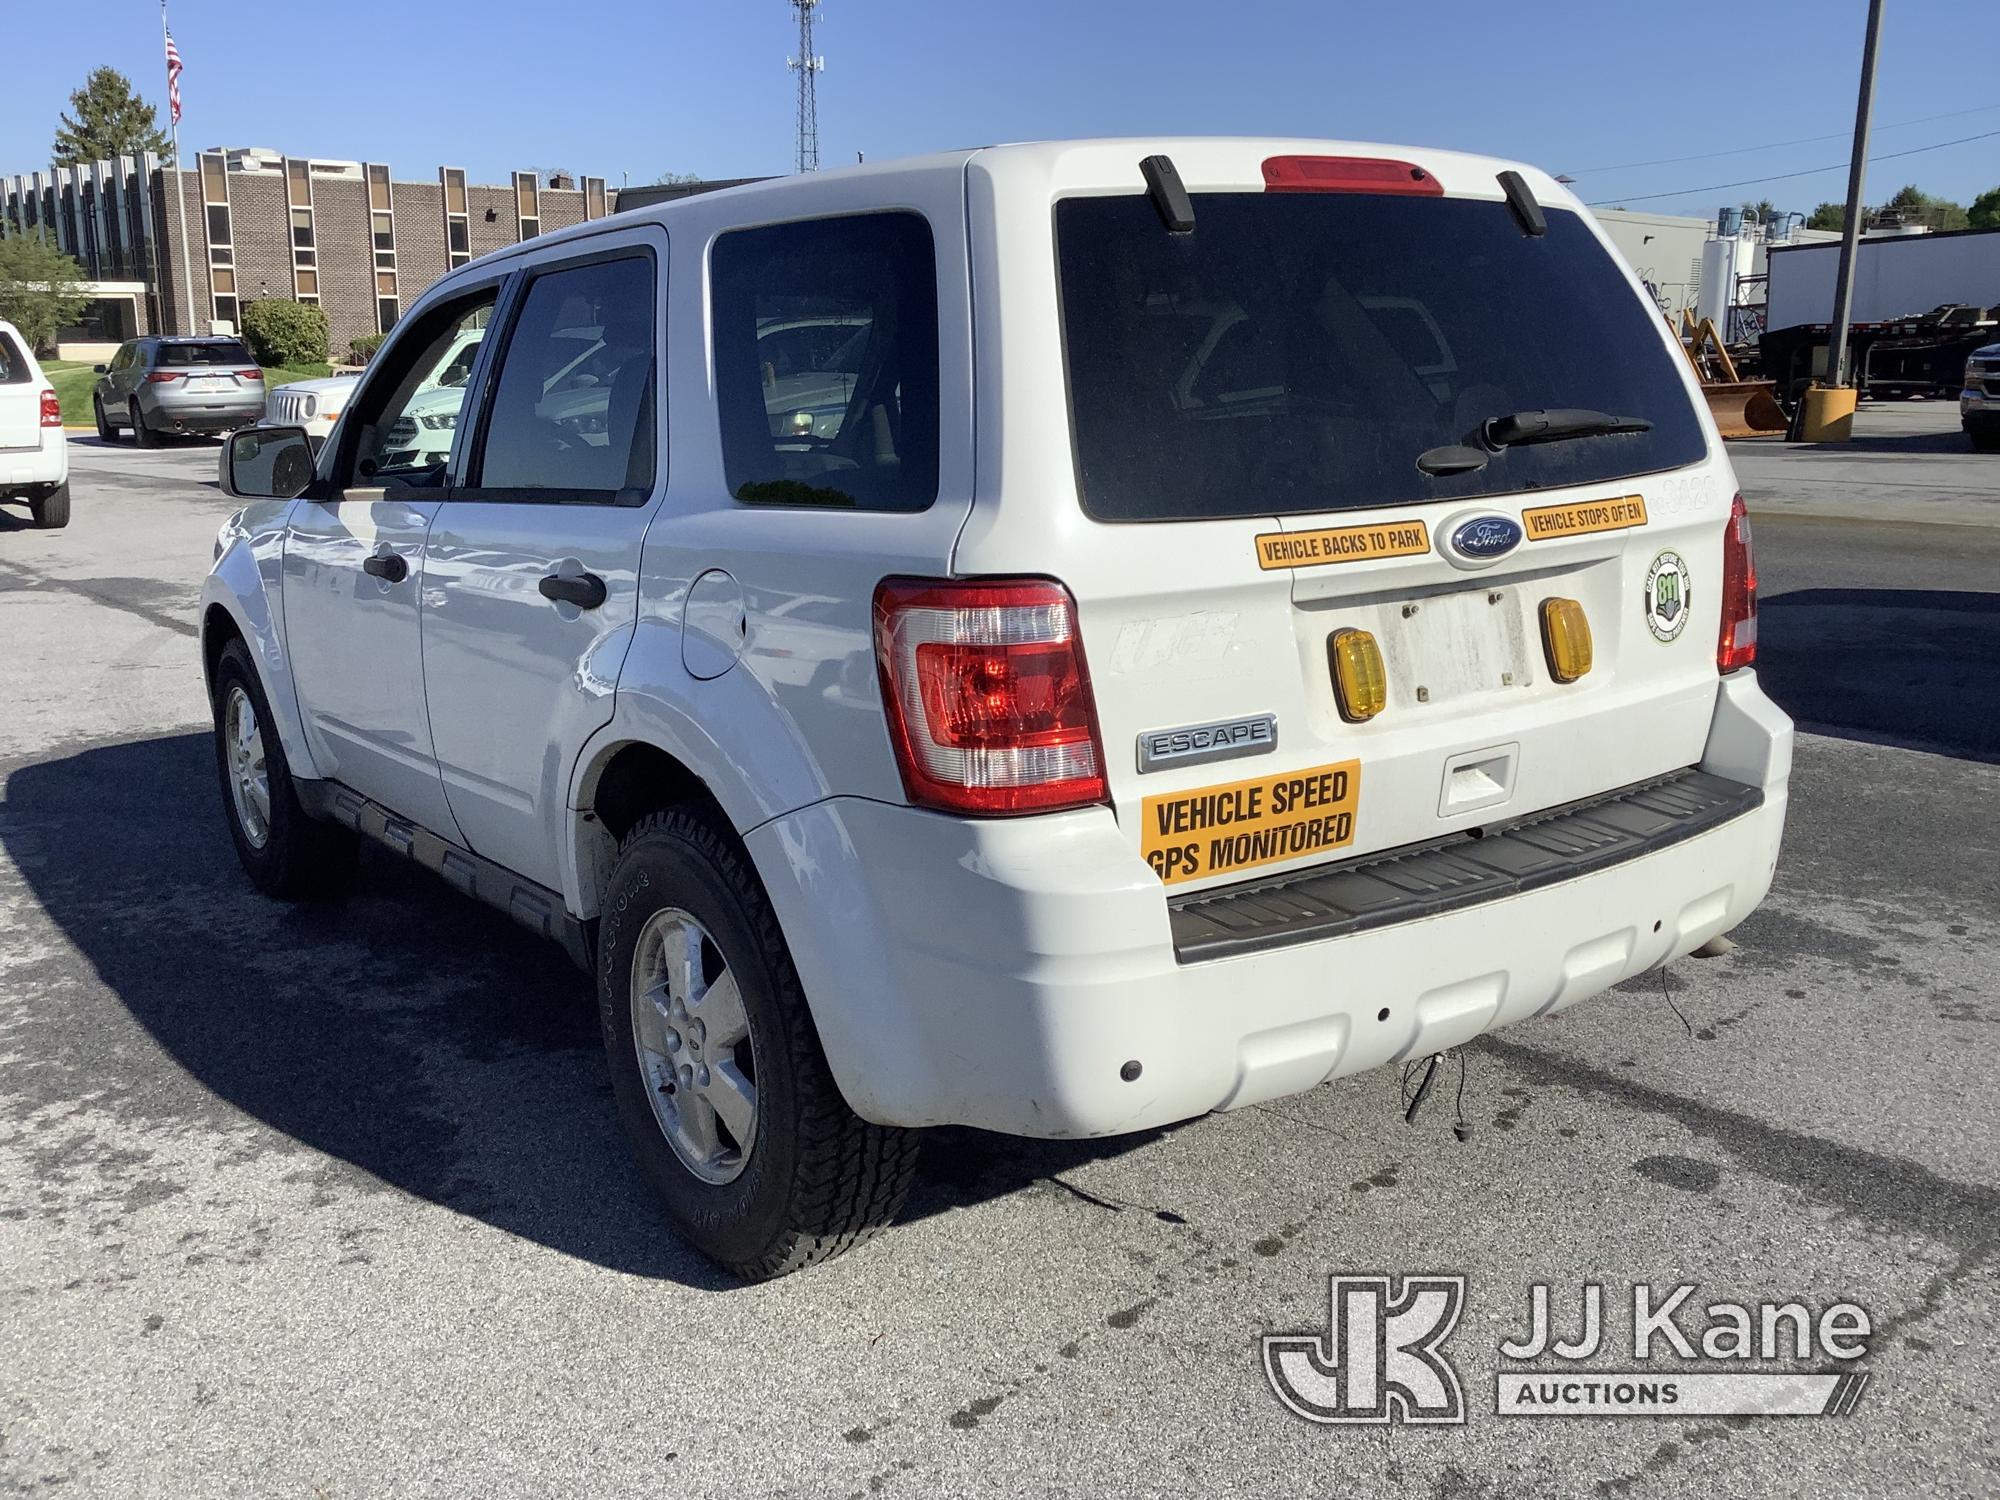 (Chester Springs, PA) 2012 Ford Escape 4-Door Sport Utility Vehicle Runs & Moves, Body & Rust Damage